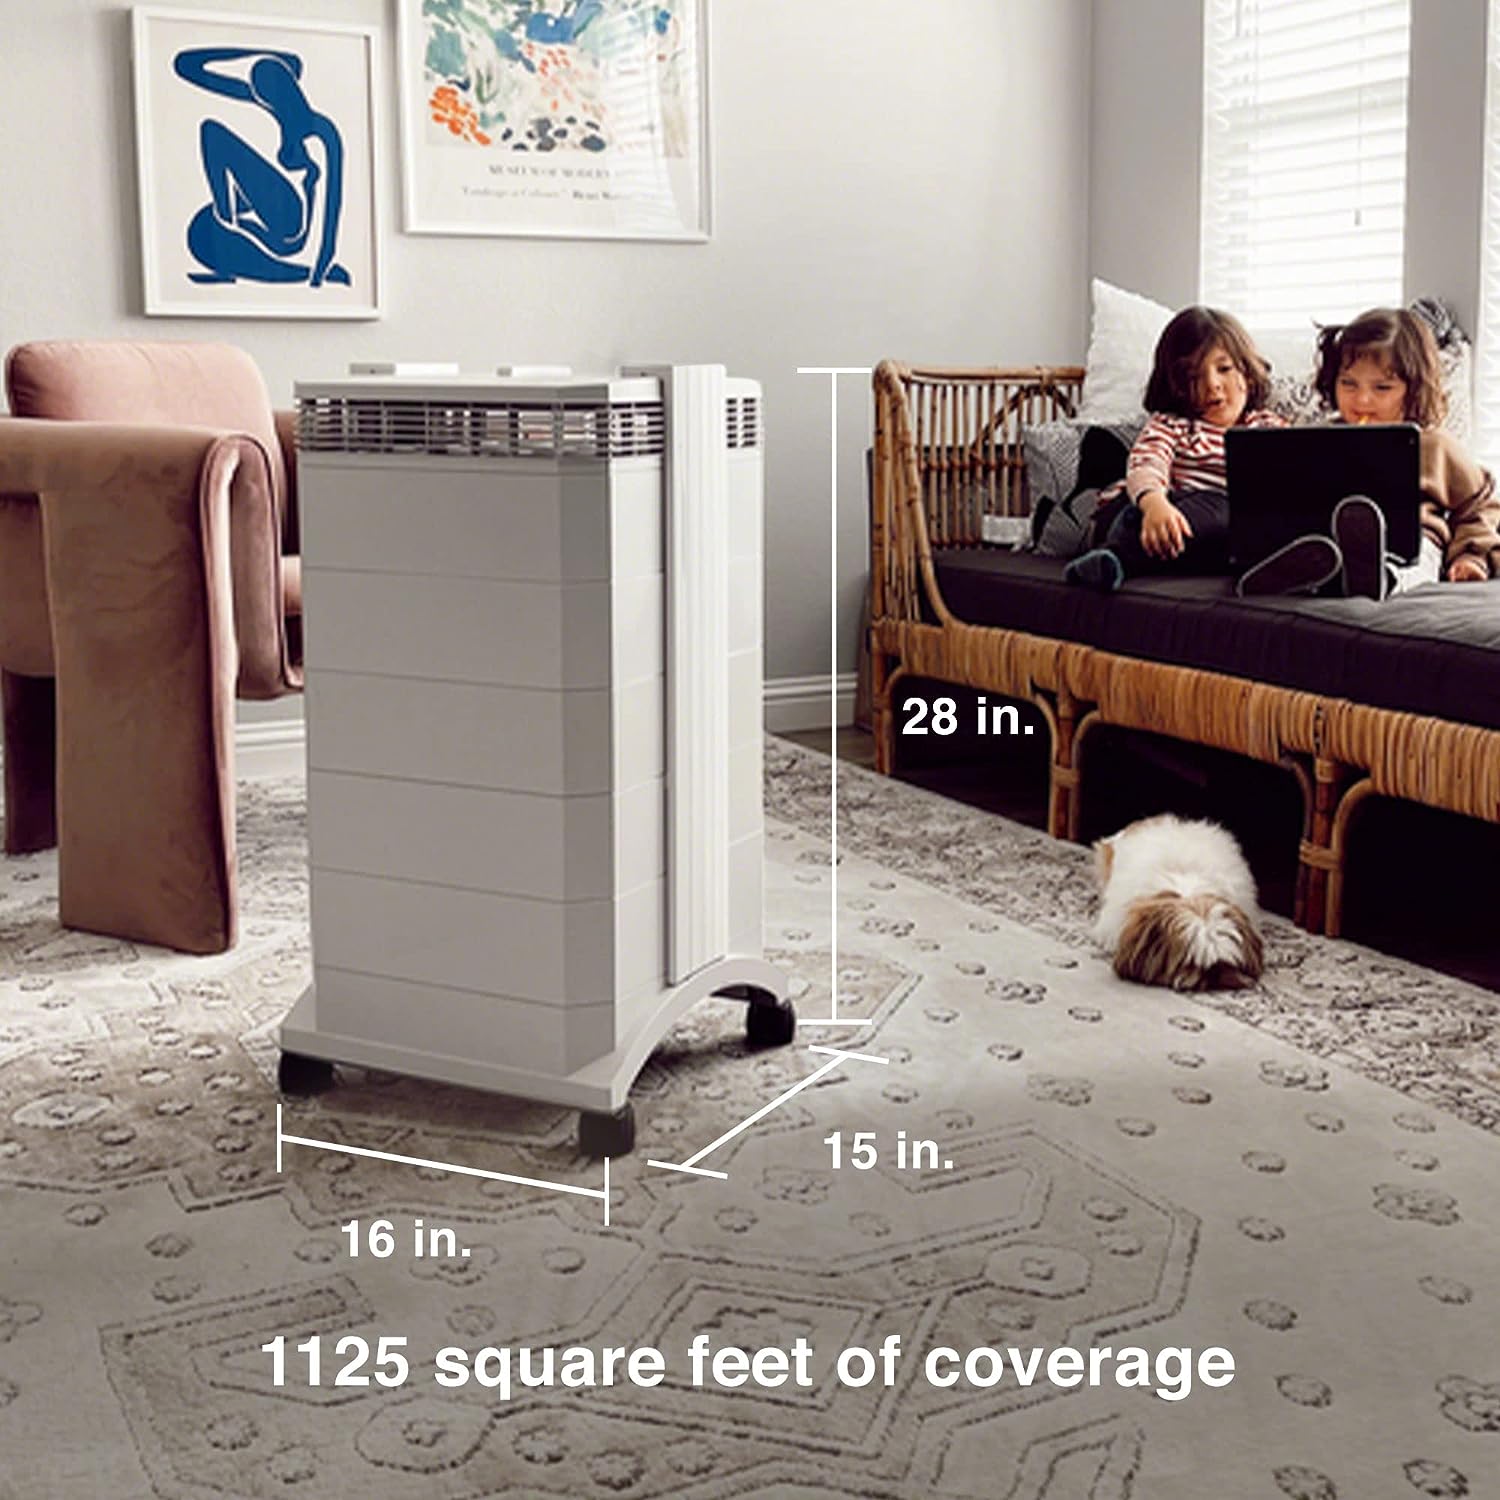 IQAir HealthPro Plus H14 HyperHEPA Air Purifier for large rooms up to 1125 sq ft - Filters bacteria/viruses, smoke, allergens, chemicals, odors and asthma triggers - image 4 of 7